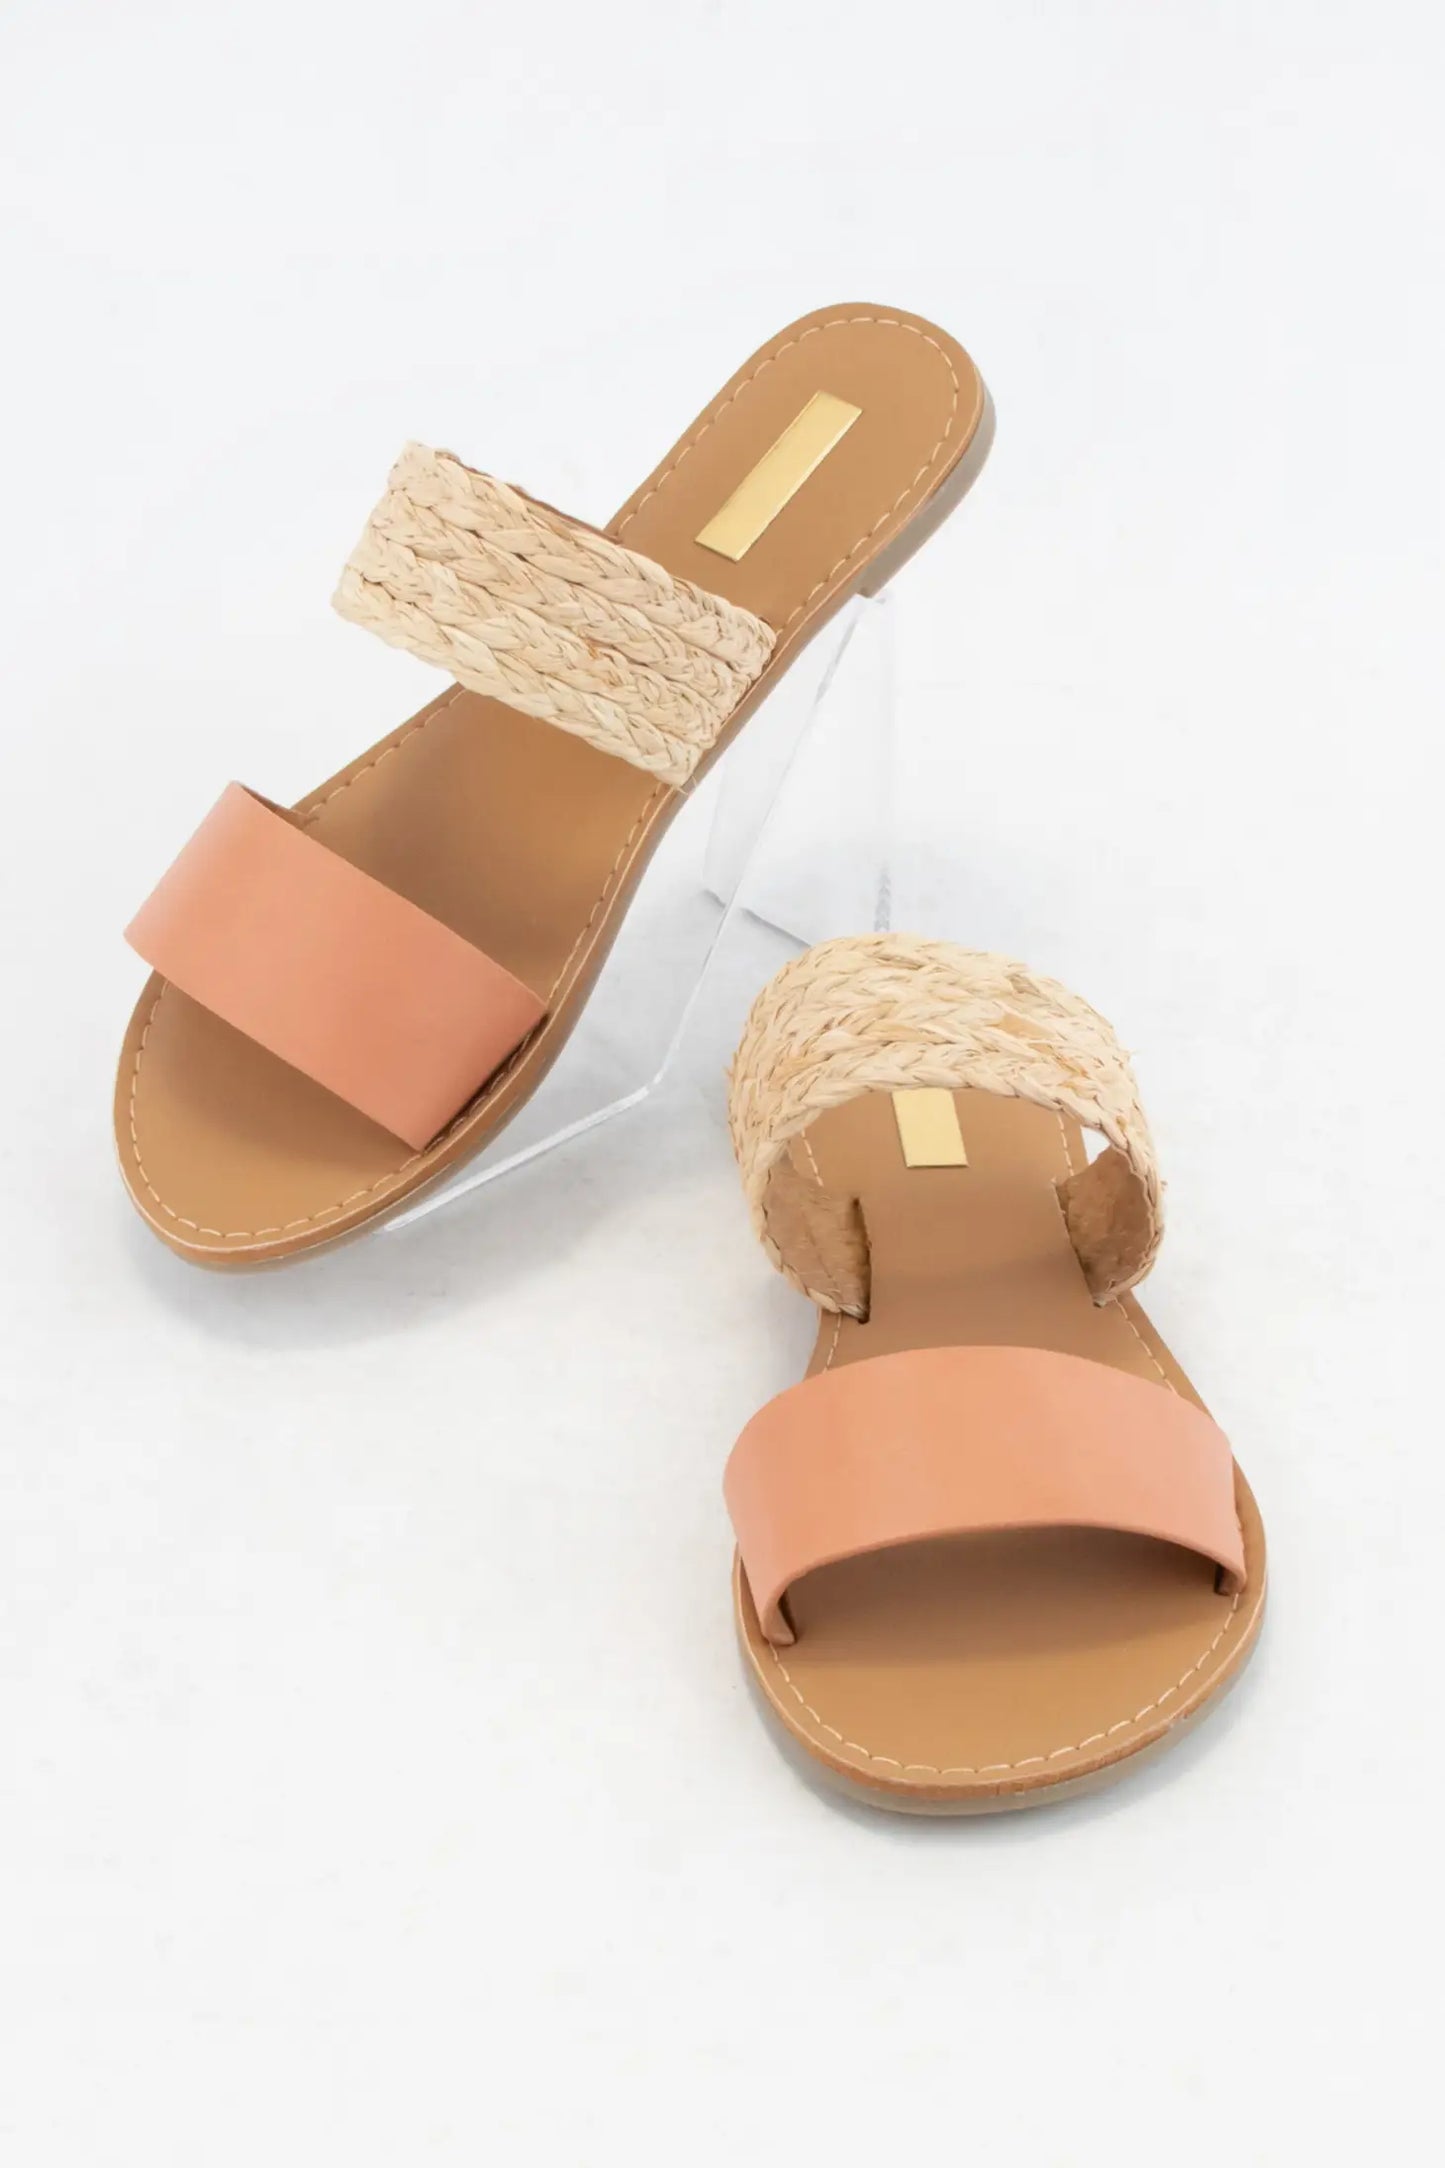 The Athena Sandals